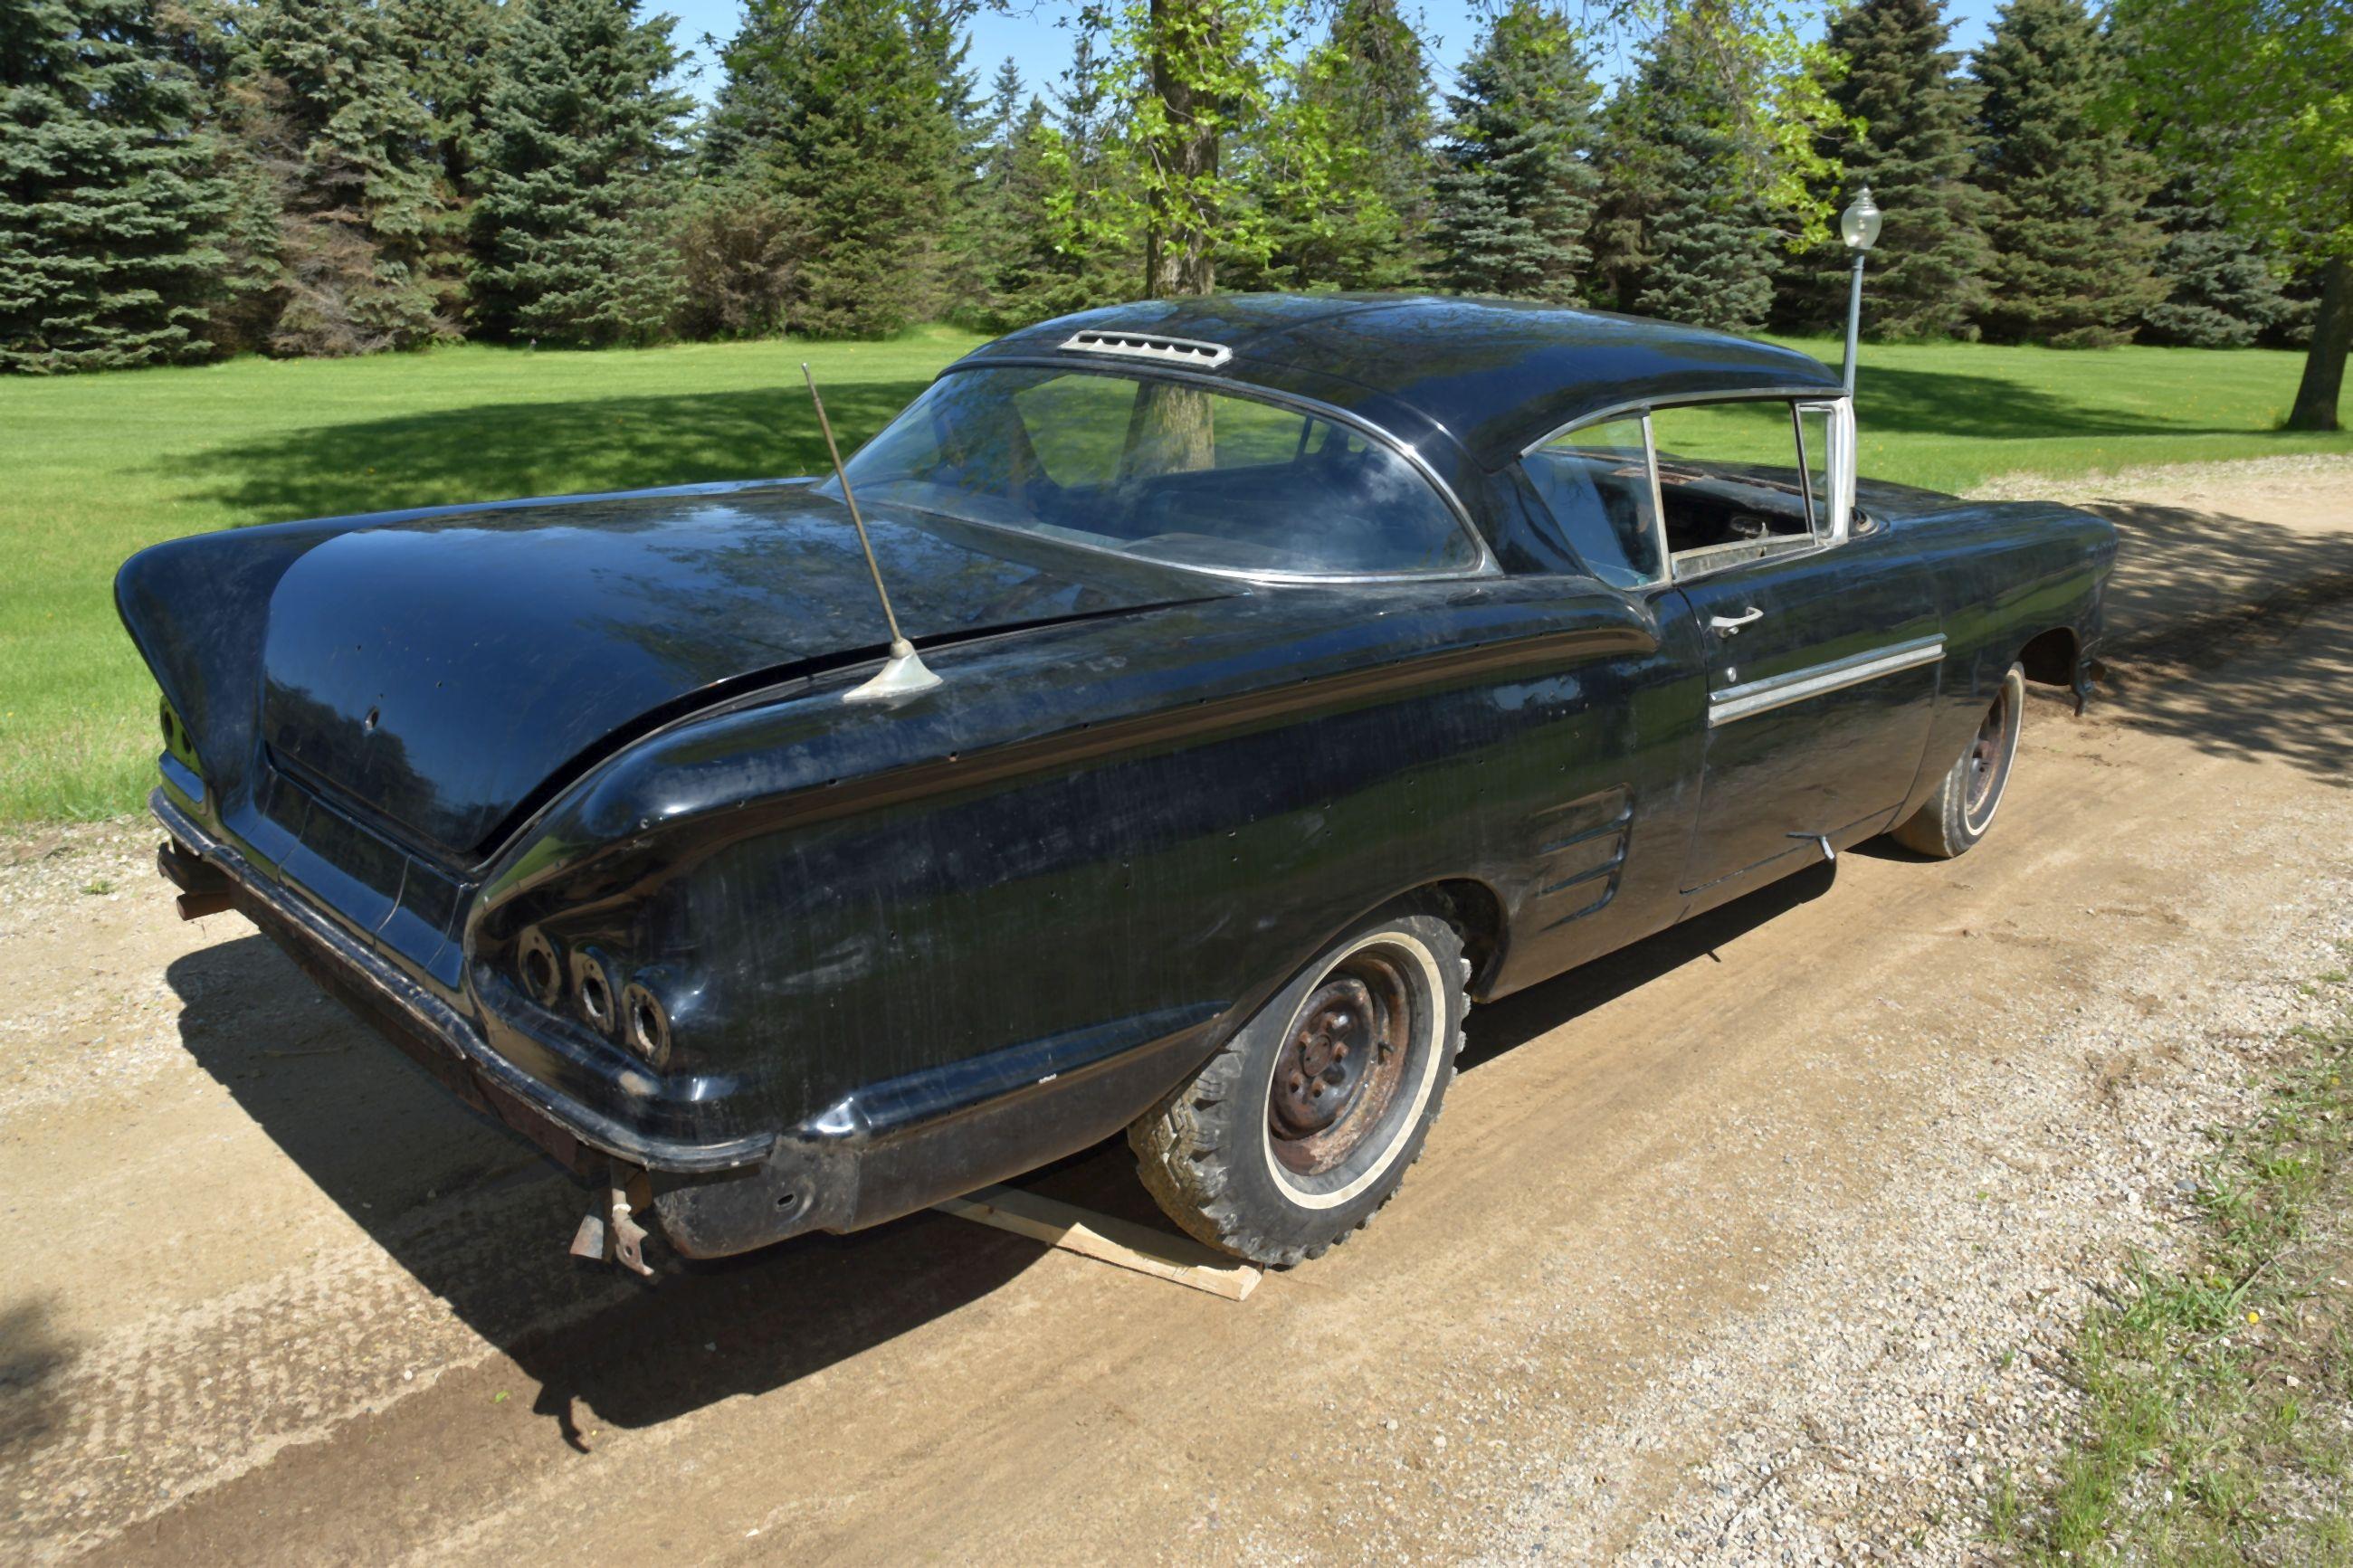 1958 Chevy Impala, 348 Power Glide, 2 Door, Motor Stuck, Many Extra Parts And Trim, Has Title